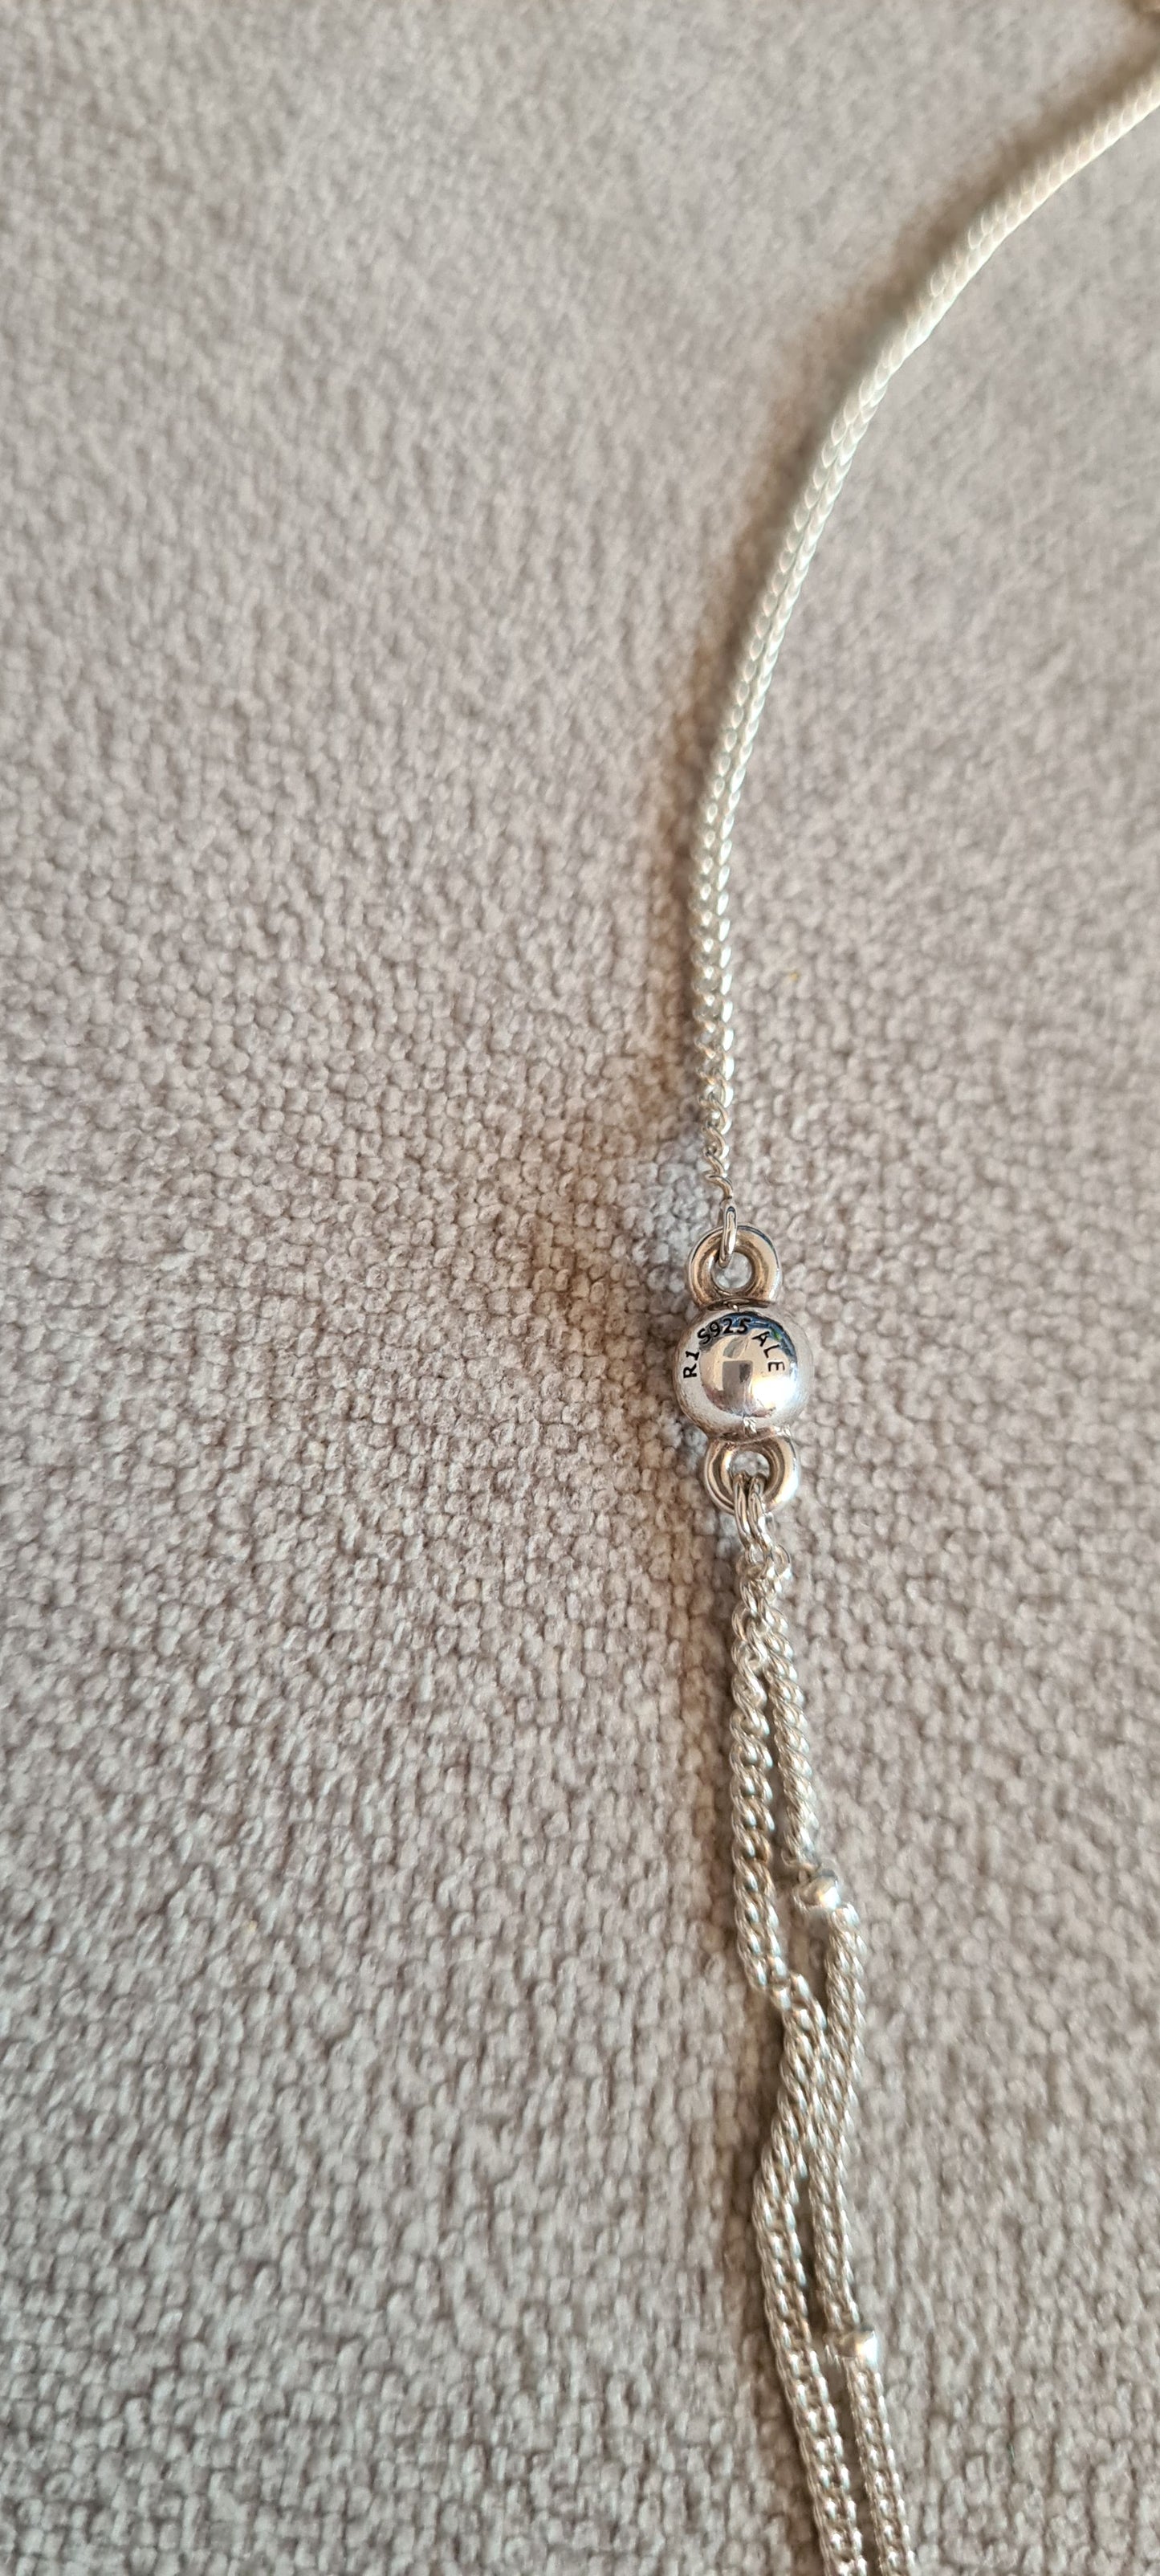 Genuine Pandora Heart Charm Carrying Necklace Unique Gift